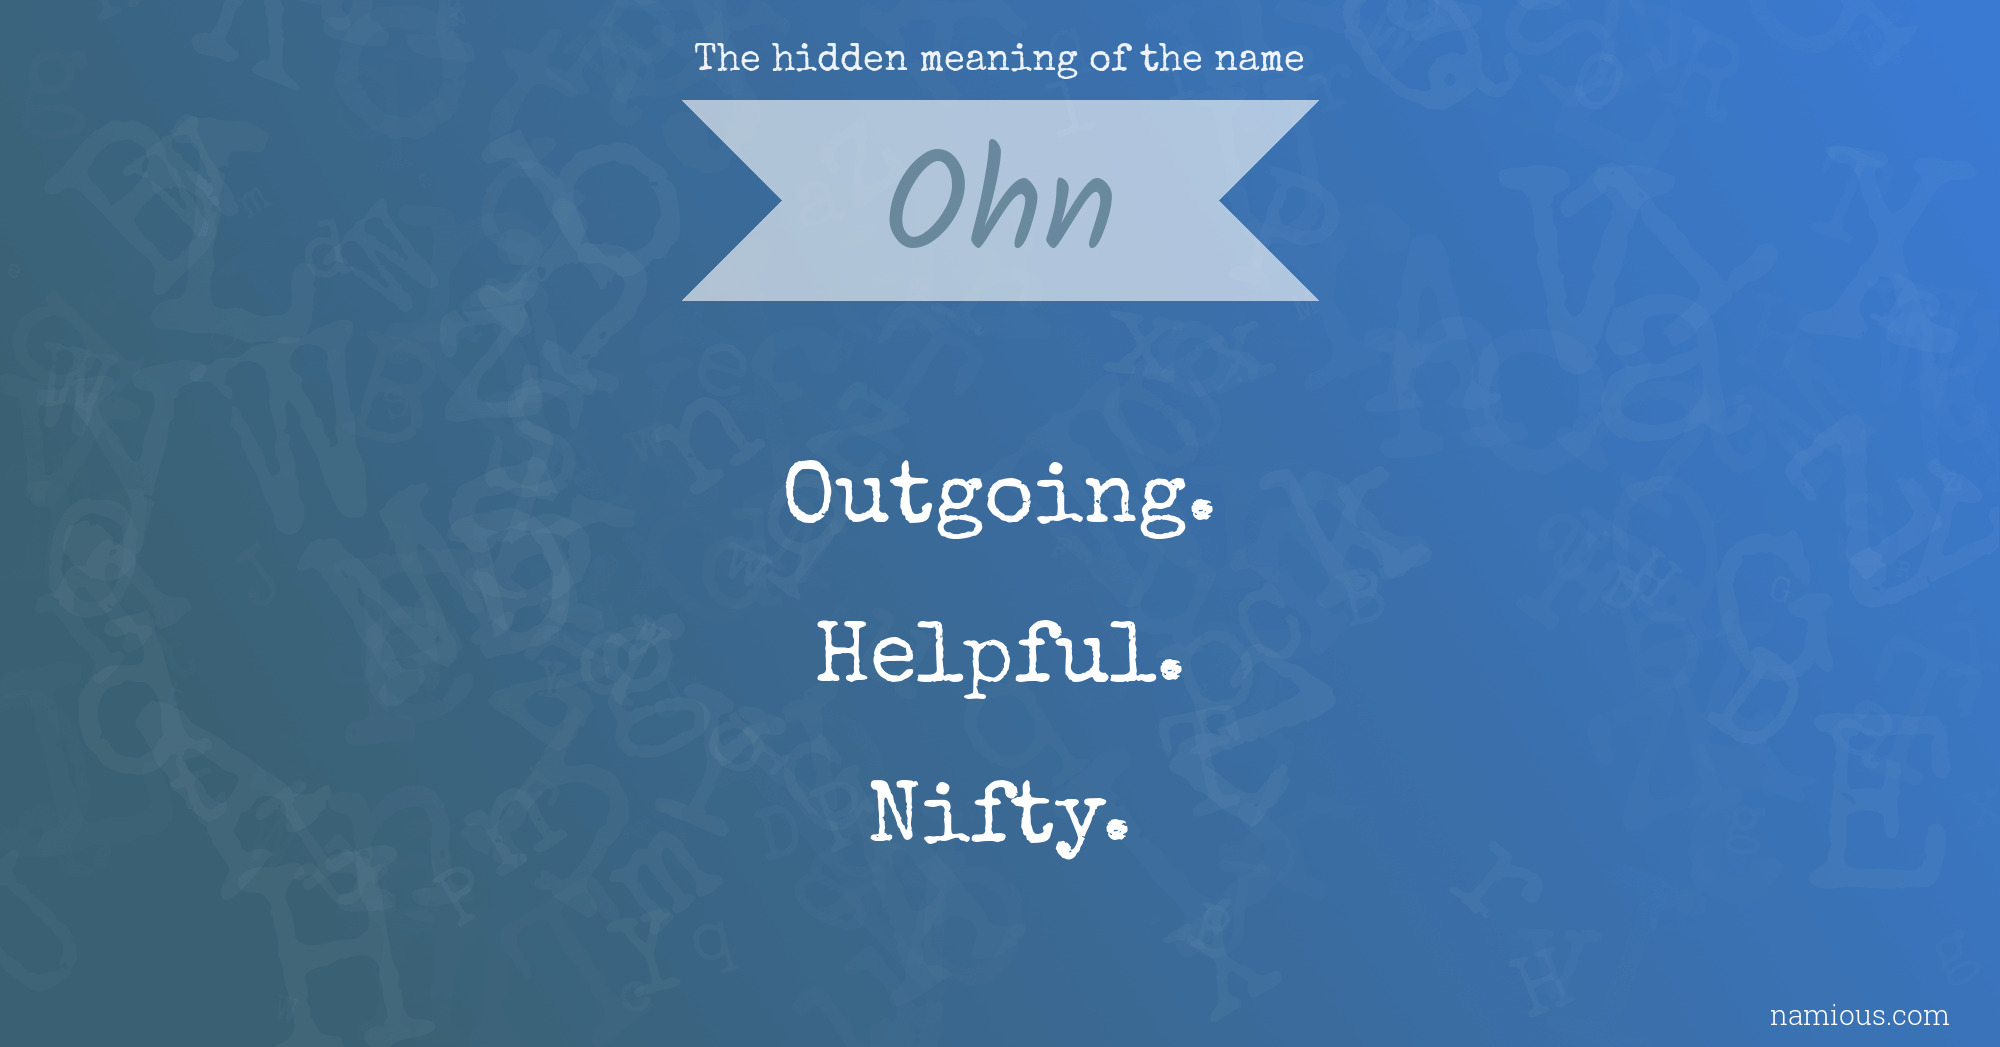 The hidden meaning of the name Ohn